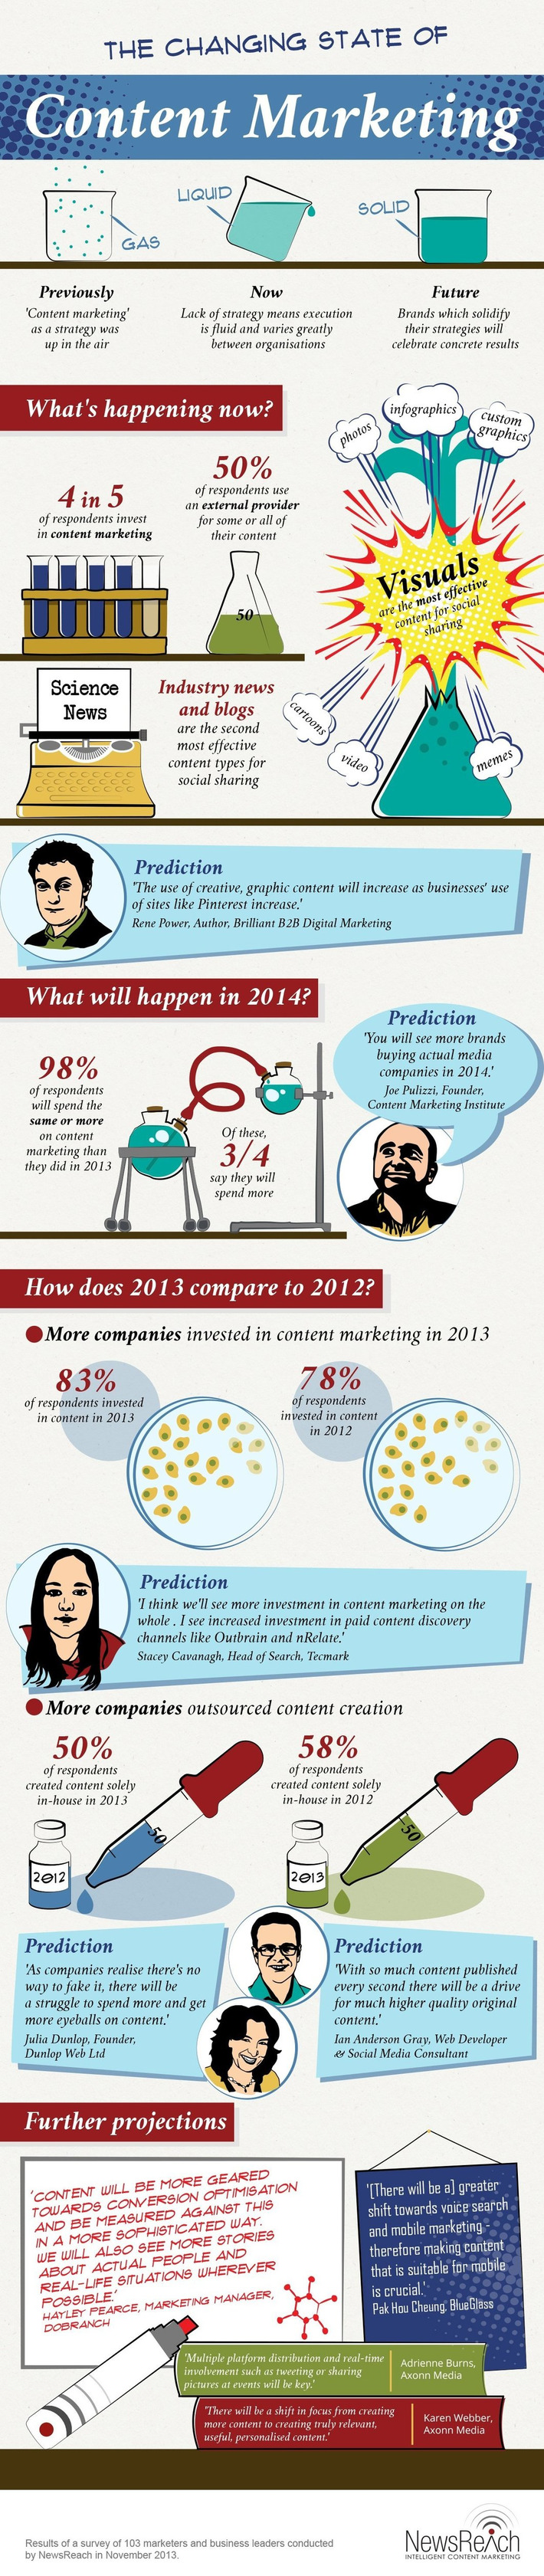 The Changing State of Content Marketing [INFOGRAPHIC] | #SeriouslySocial | A Marketing Mix | Scoop.it